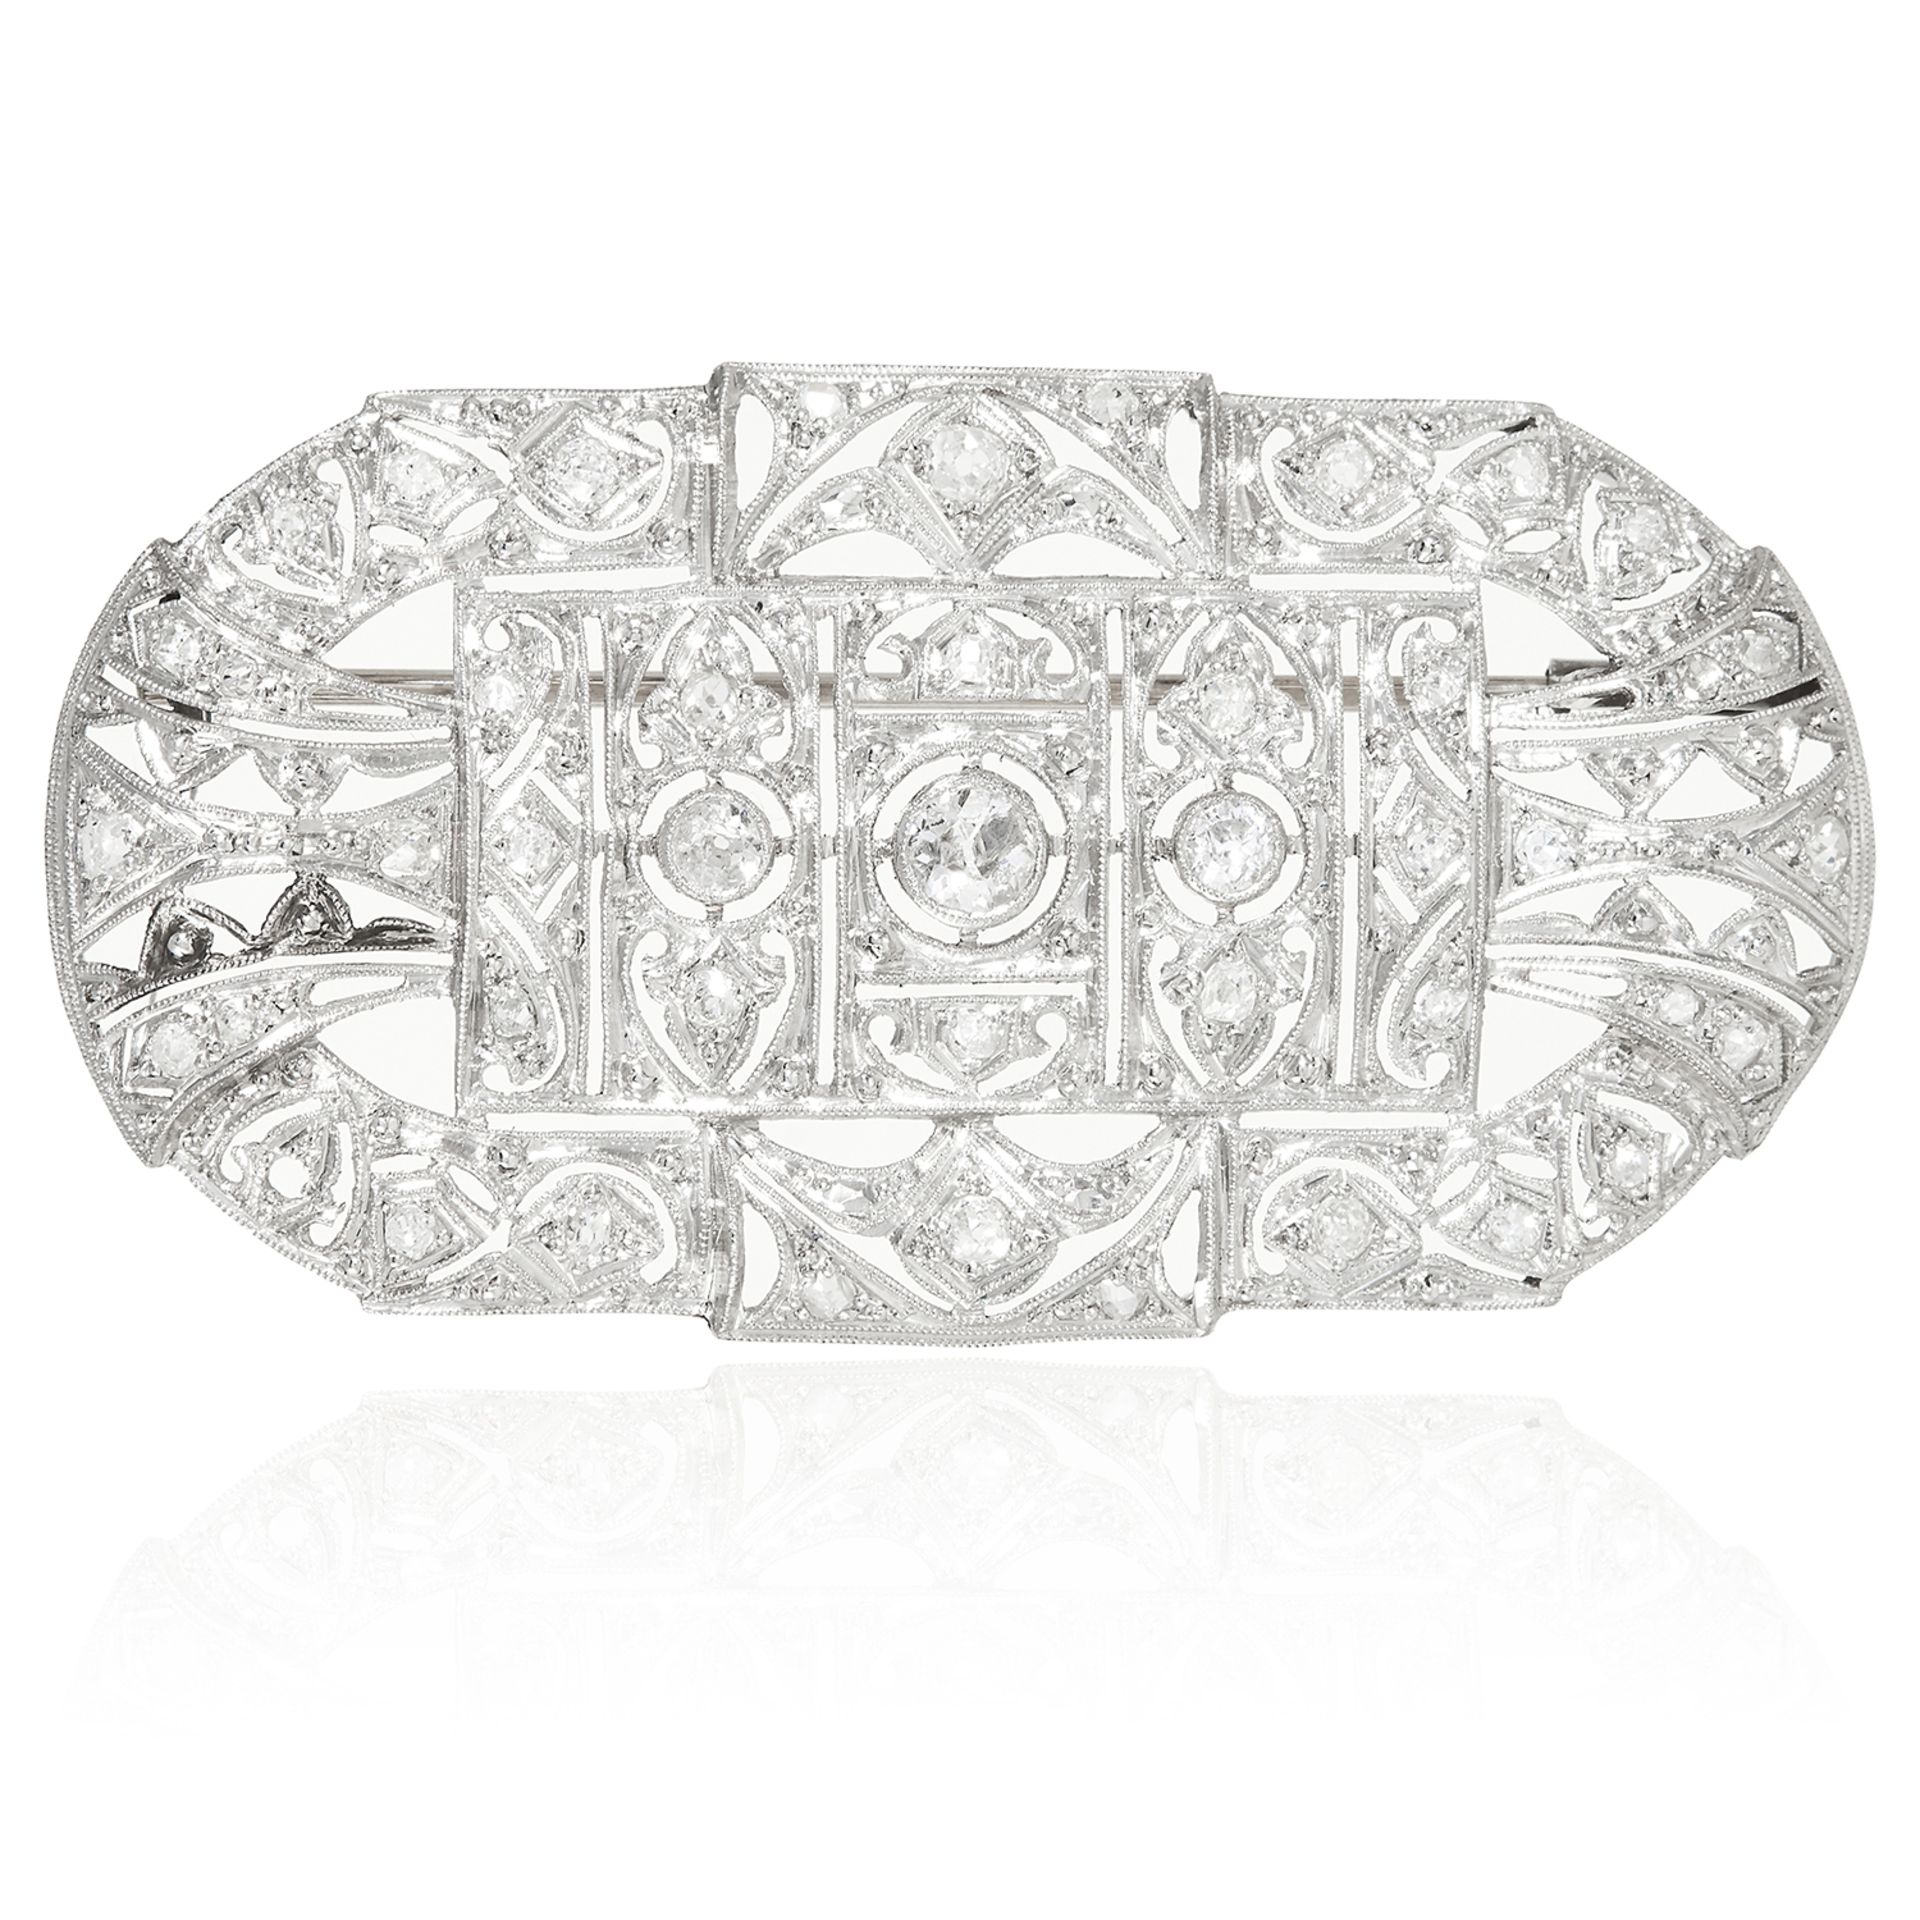 AN ART DECO DIAMOND BROOCH in 18ct white gold, in Art Deco design, set with old cut diamonds,